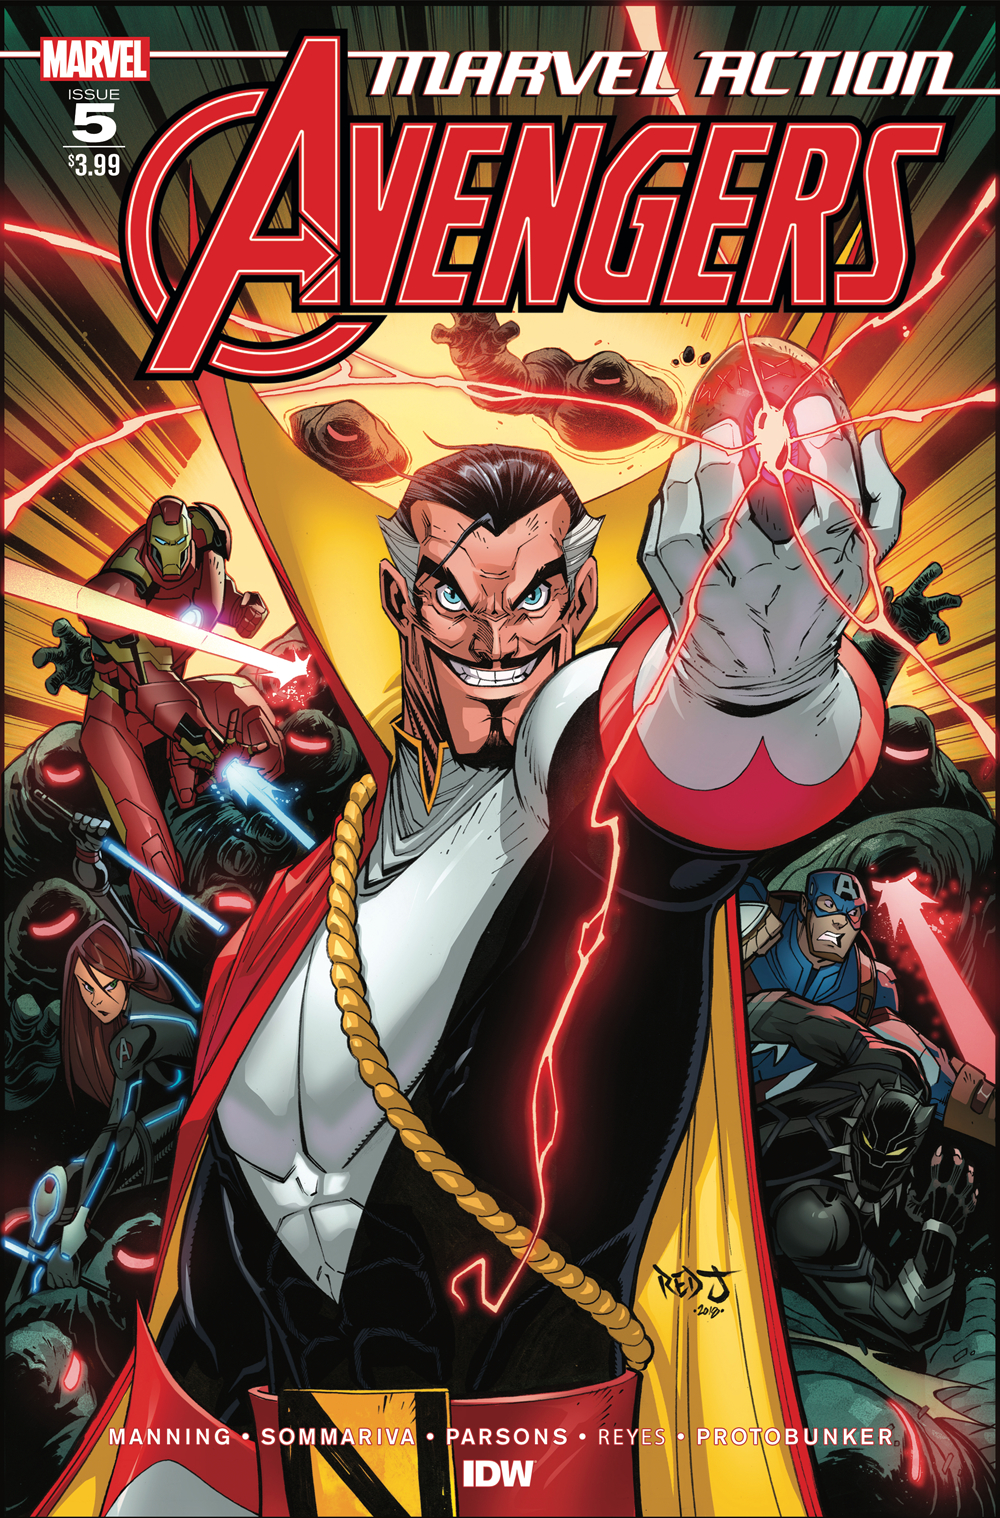 Marvel Action Avengers no. 5 (2018 Series)